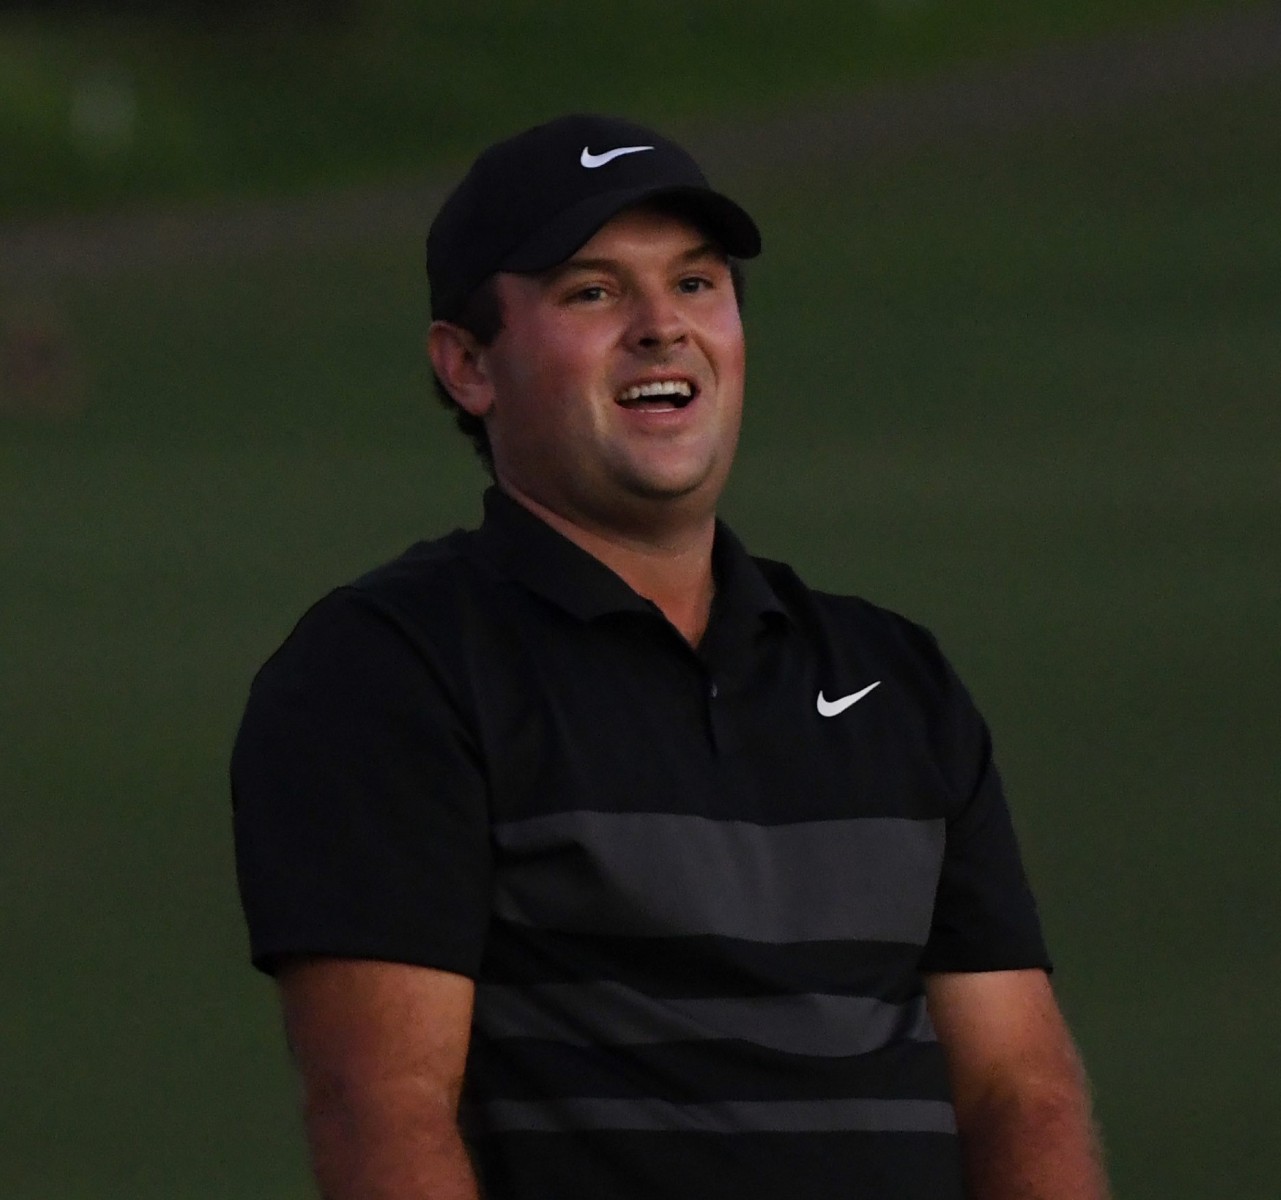 , Fan yells cheater at controversial golfer Patrick Reed as he misses crucial putt worth 535,000